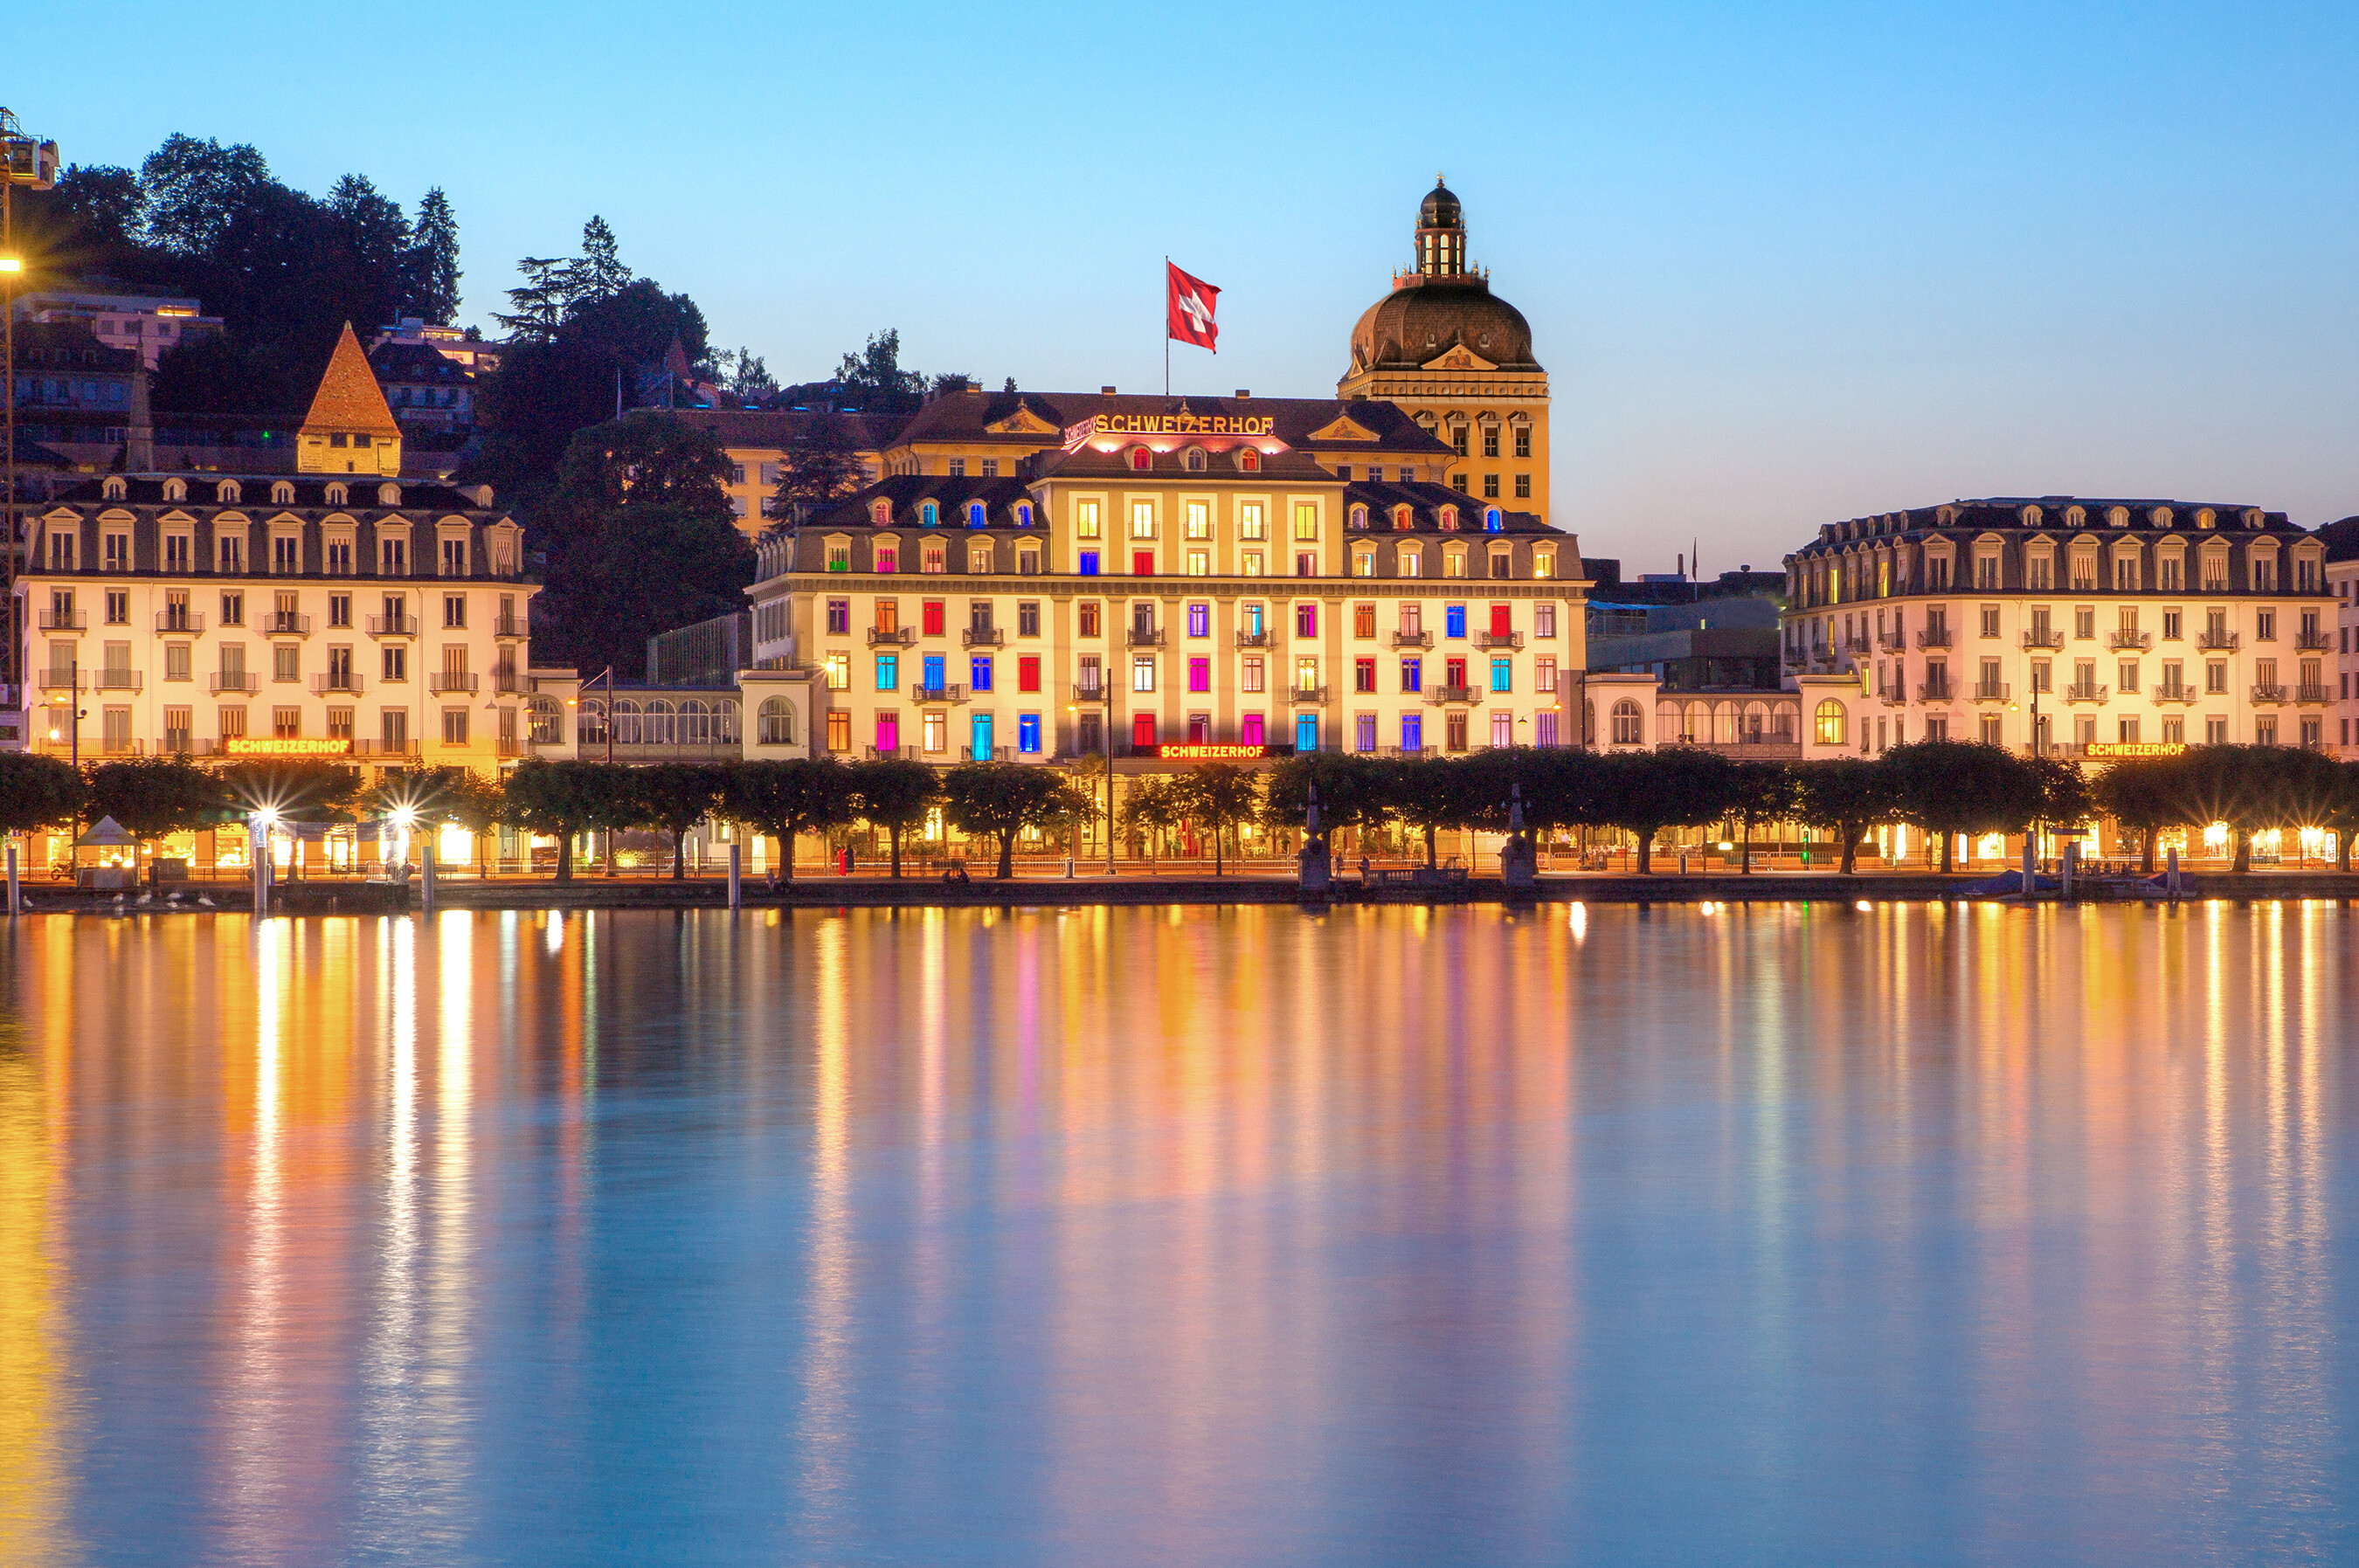 <p>Best location in the<br
/>City of Lights Lucerne</p>